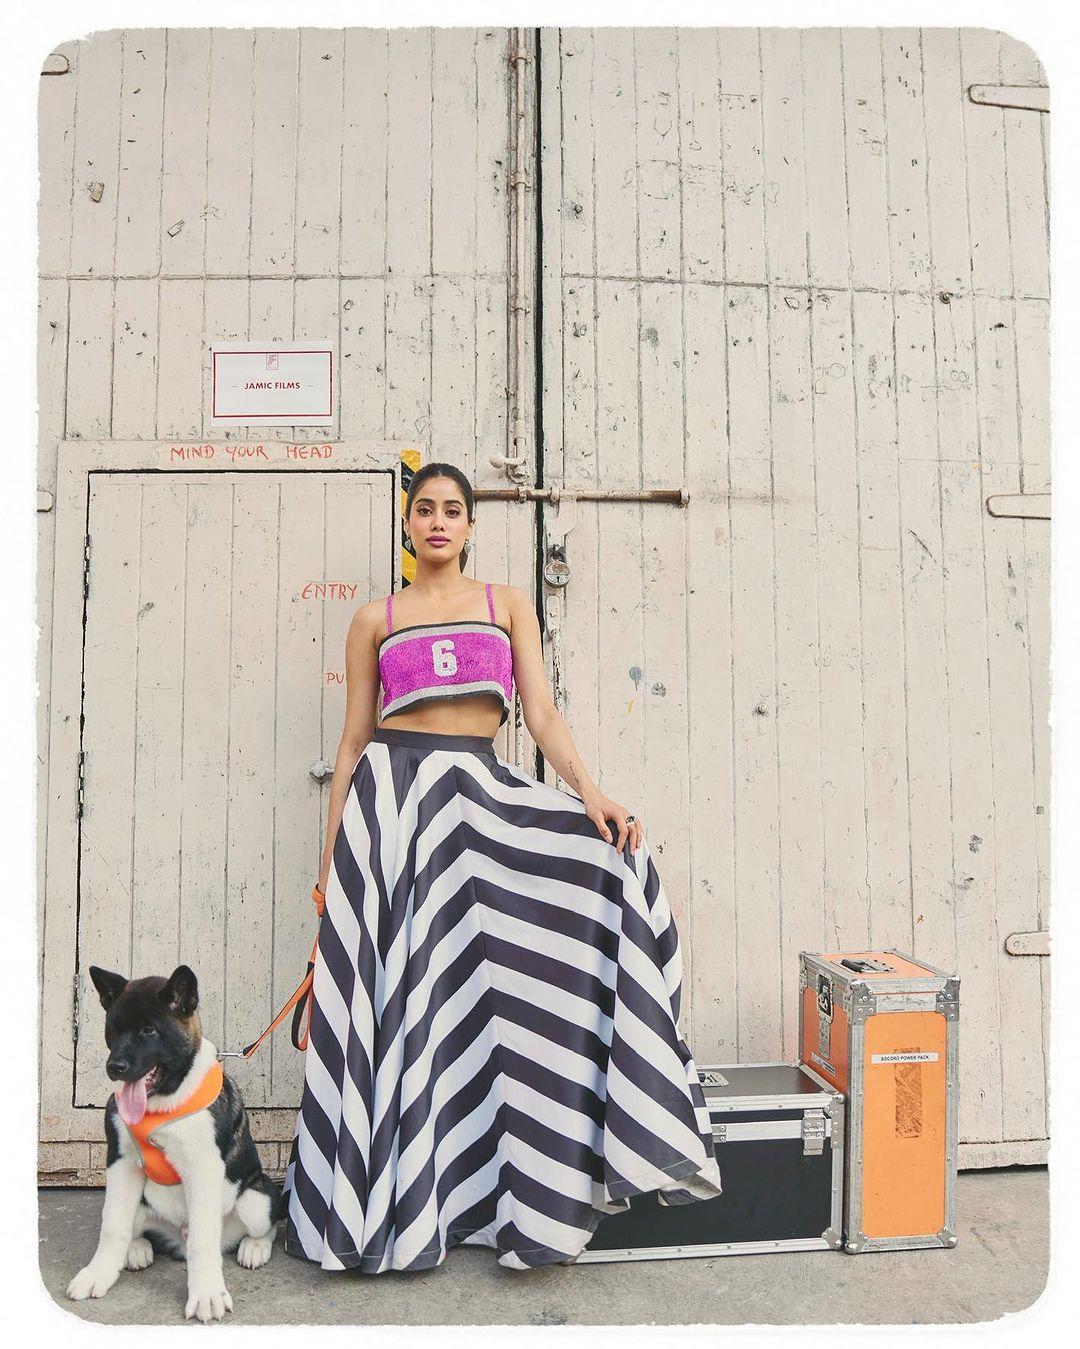 In another look, Janhvi opted for a purple crop top and paired it with a long black and white striped skirt